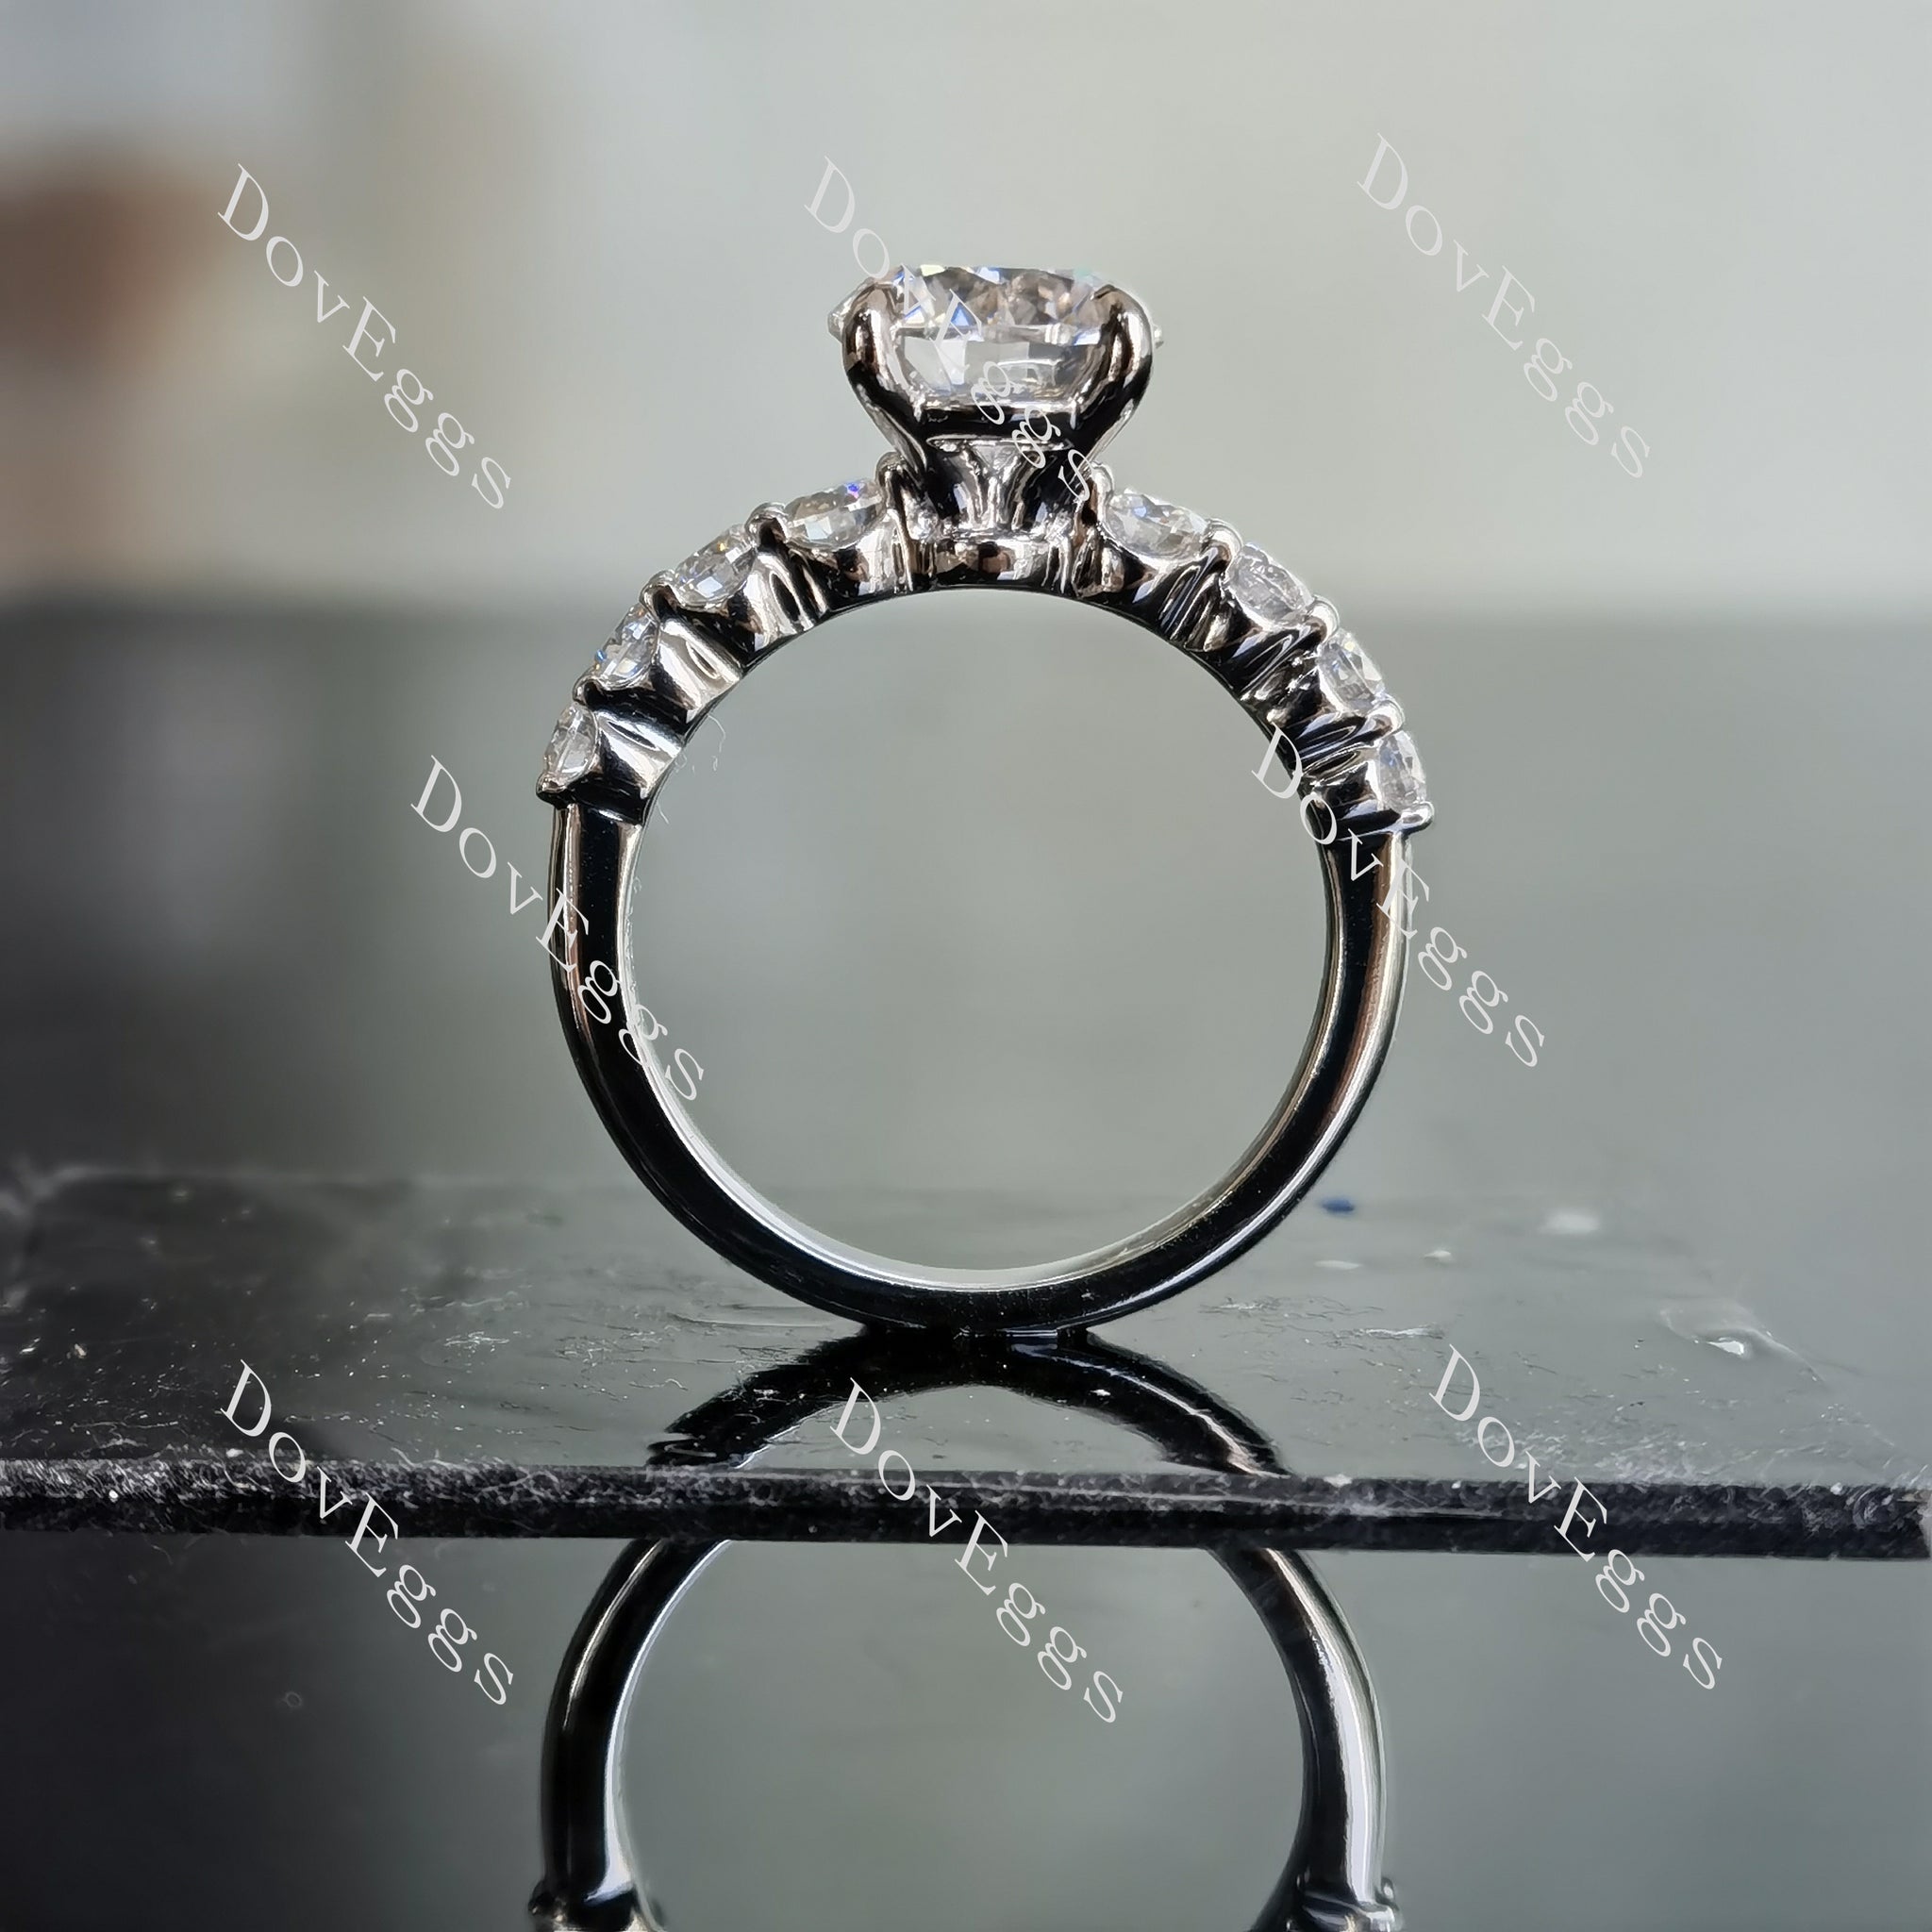 Doveggs round pave moissanite engagement ring (engagement ring only)